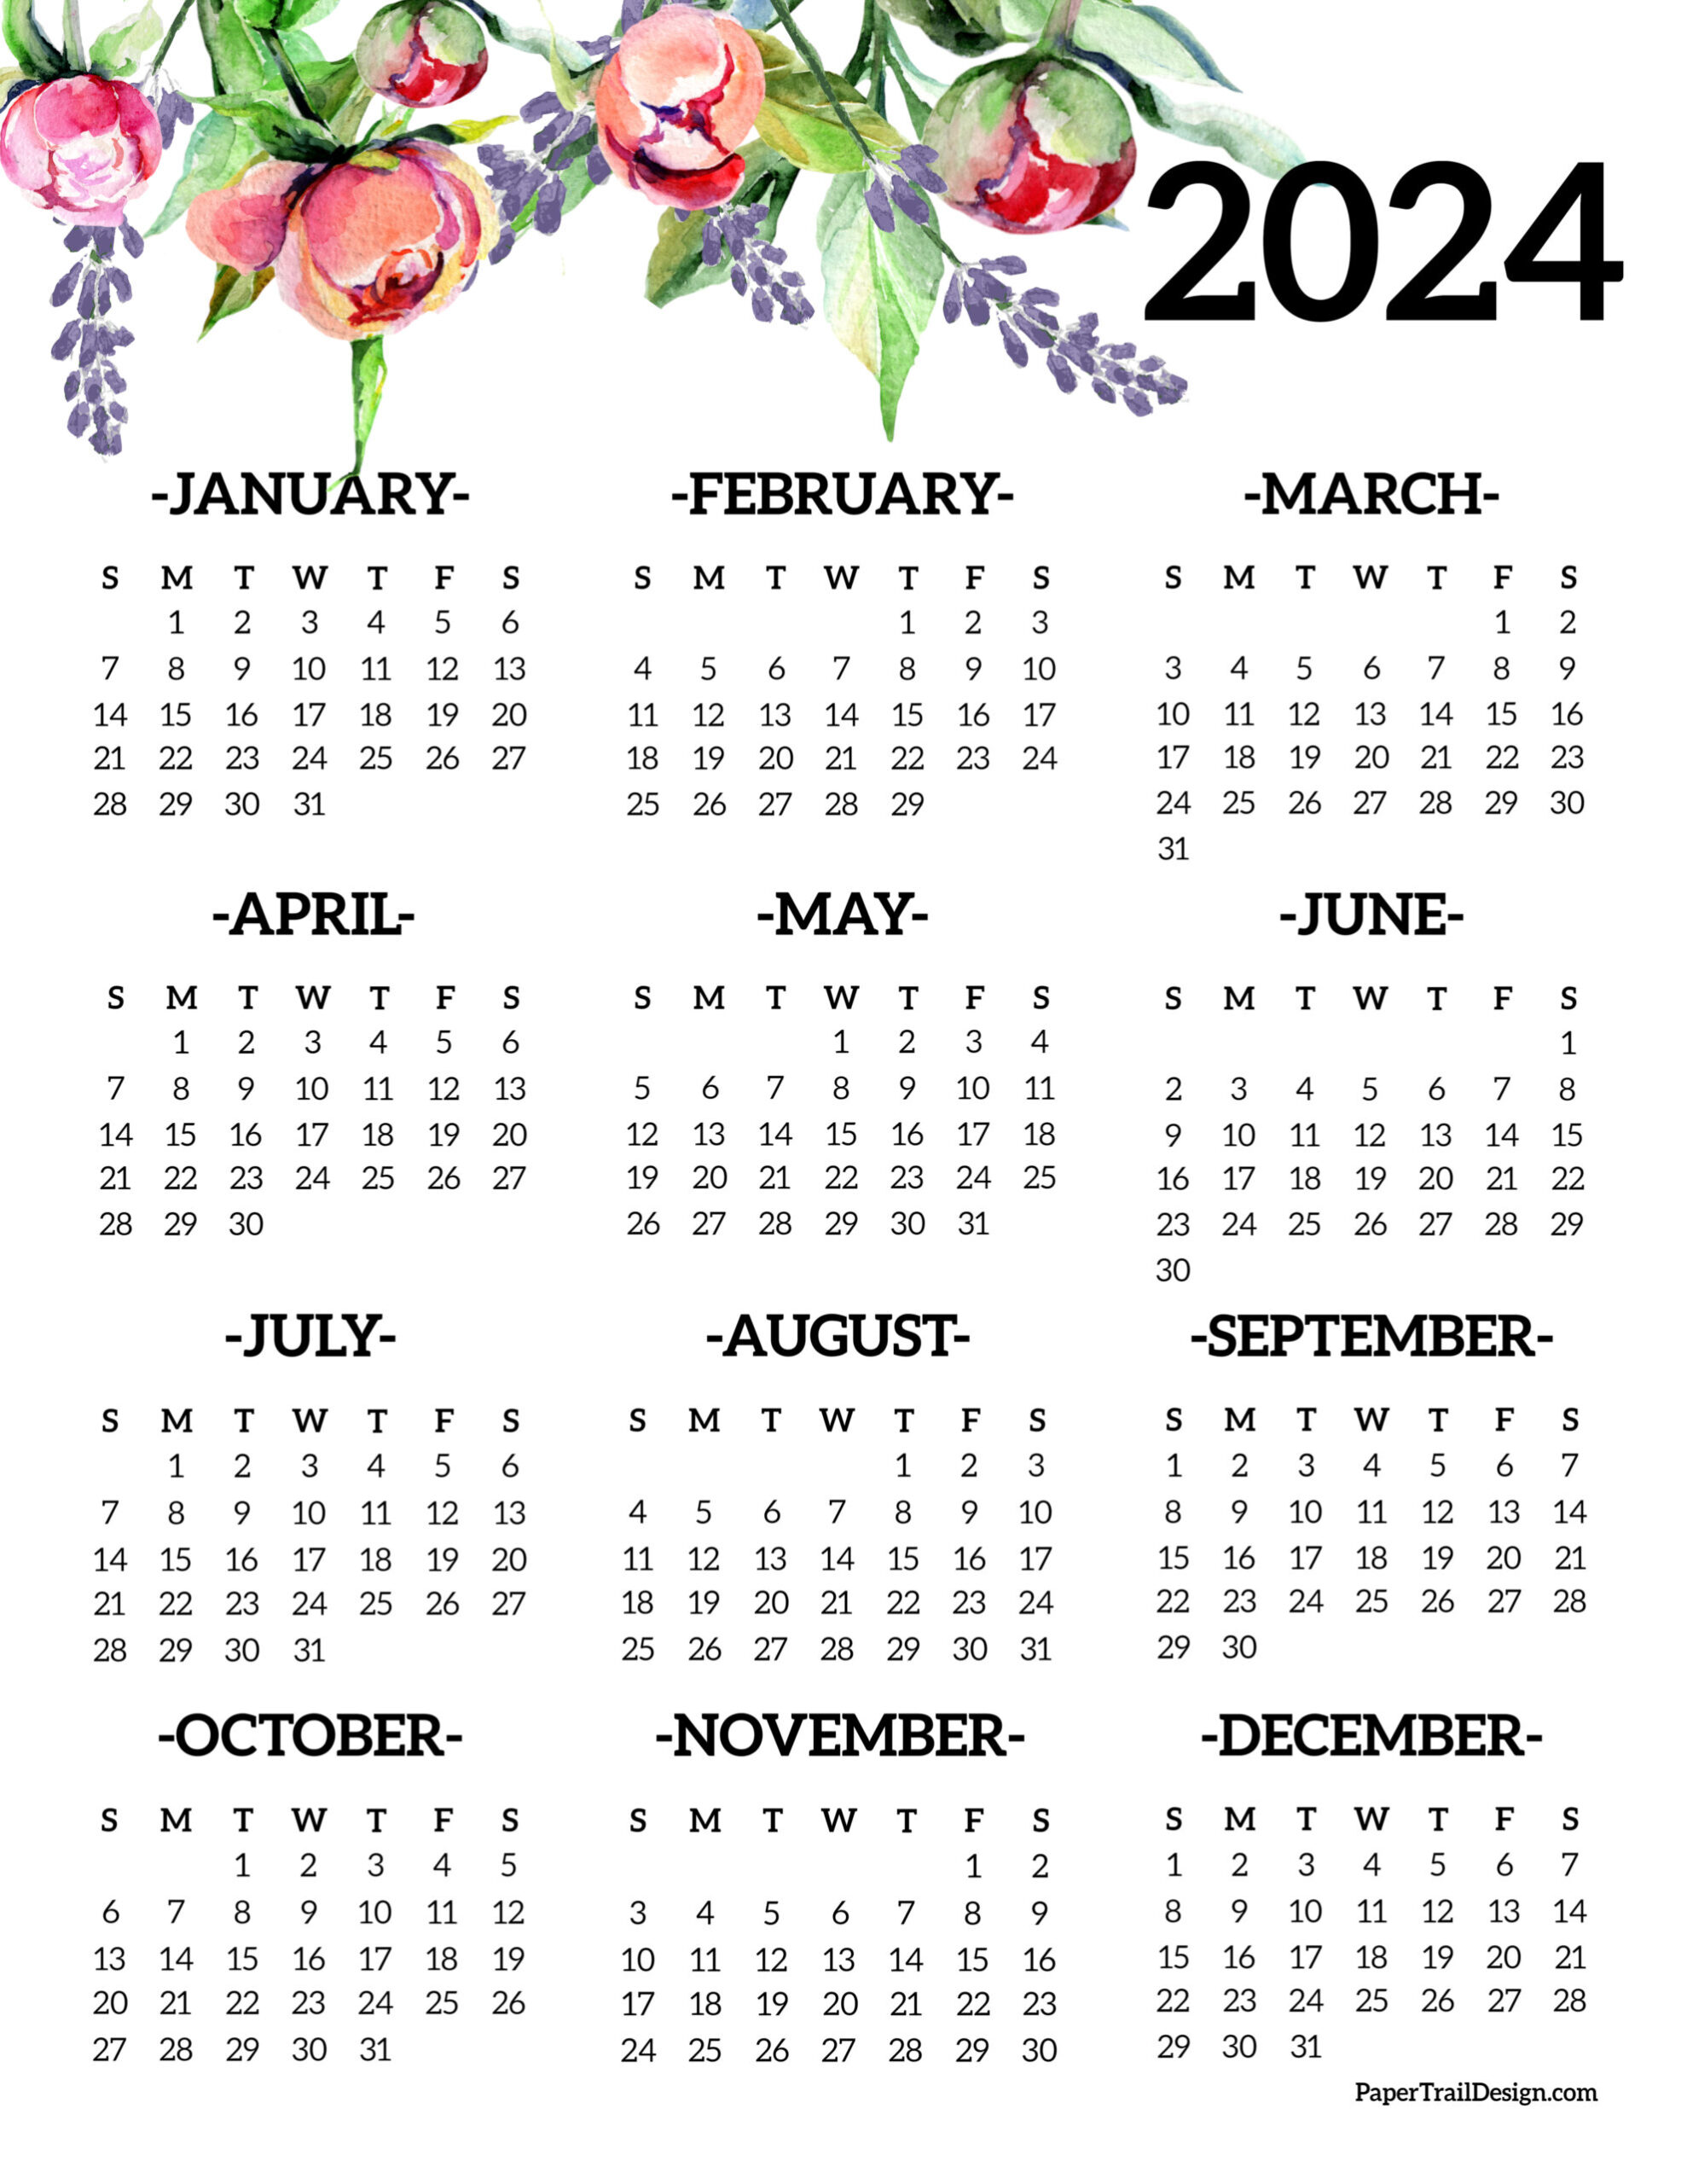 Calendar 2024 Printable One Page - Paper Trail Design for 2024 One Page Printable Calendar